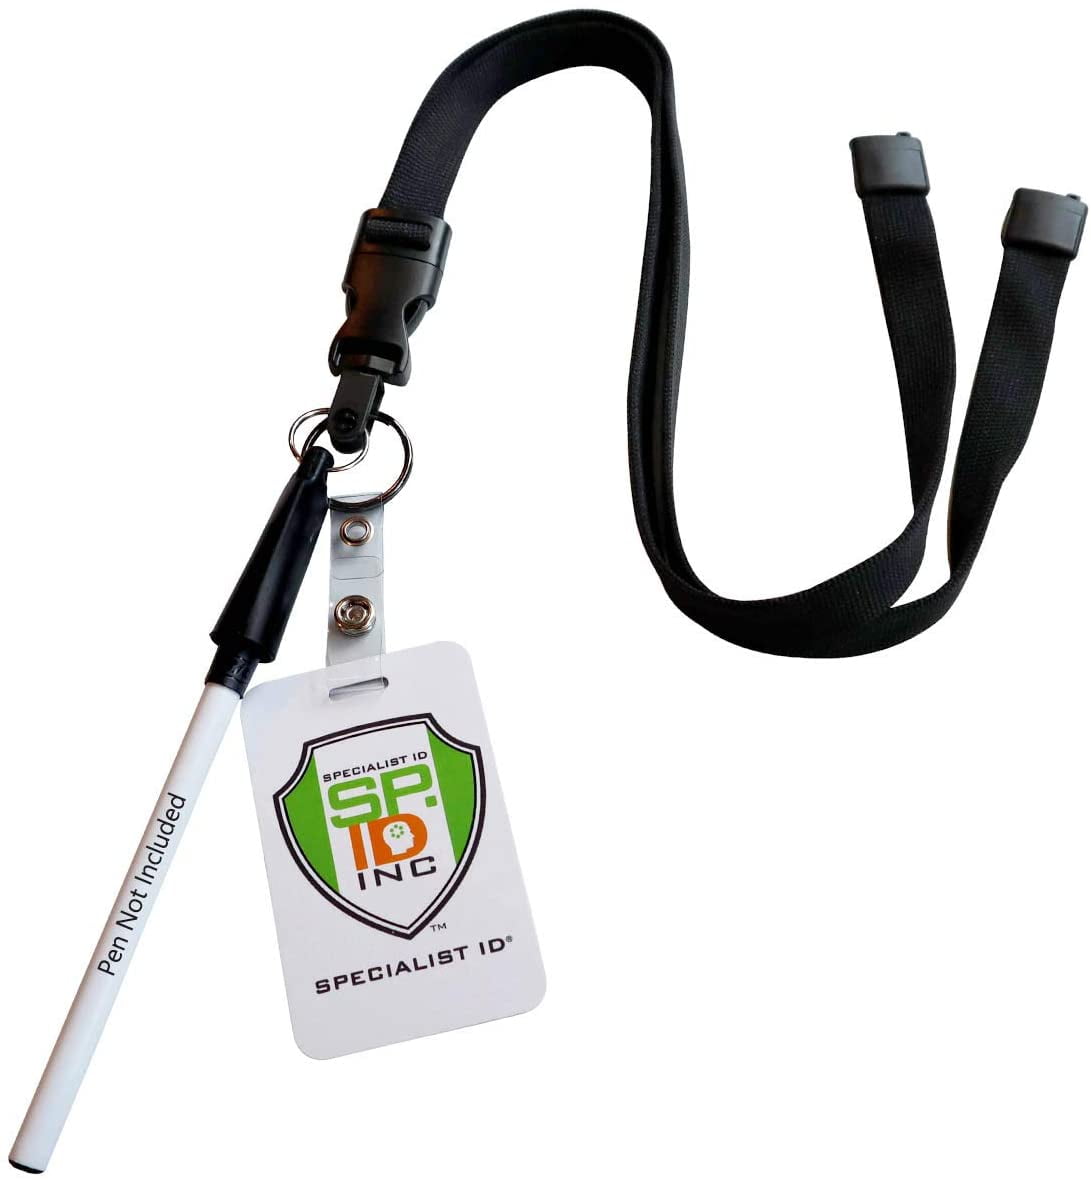 Specialist ID Nylon Badge Holder with Pen Loop Key Ring and Heavy Duty Lanyard 